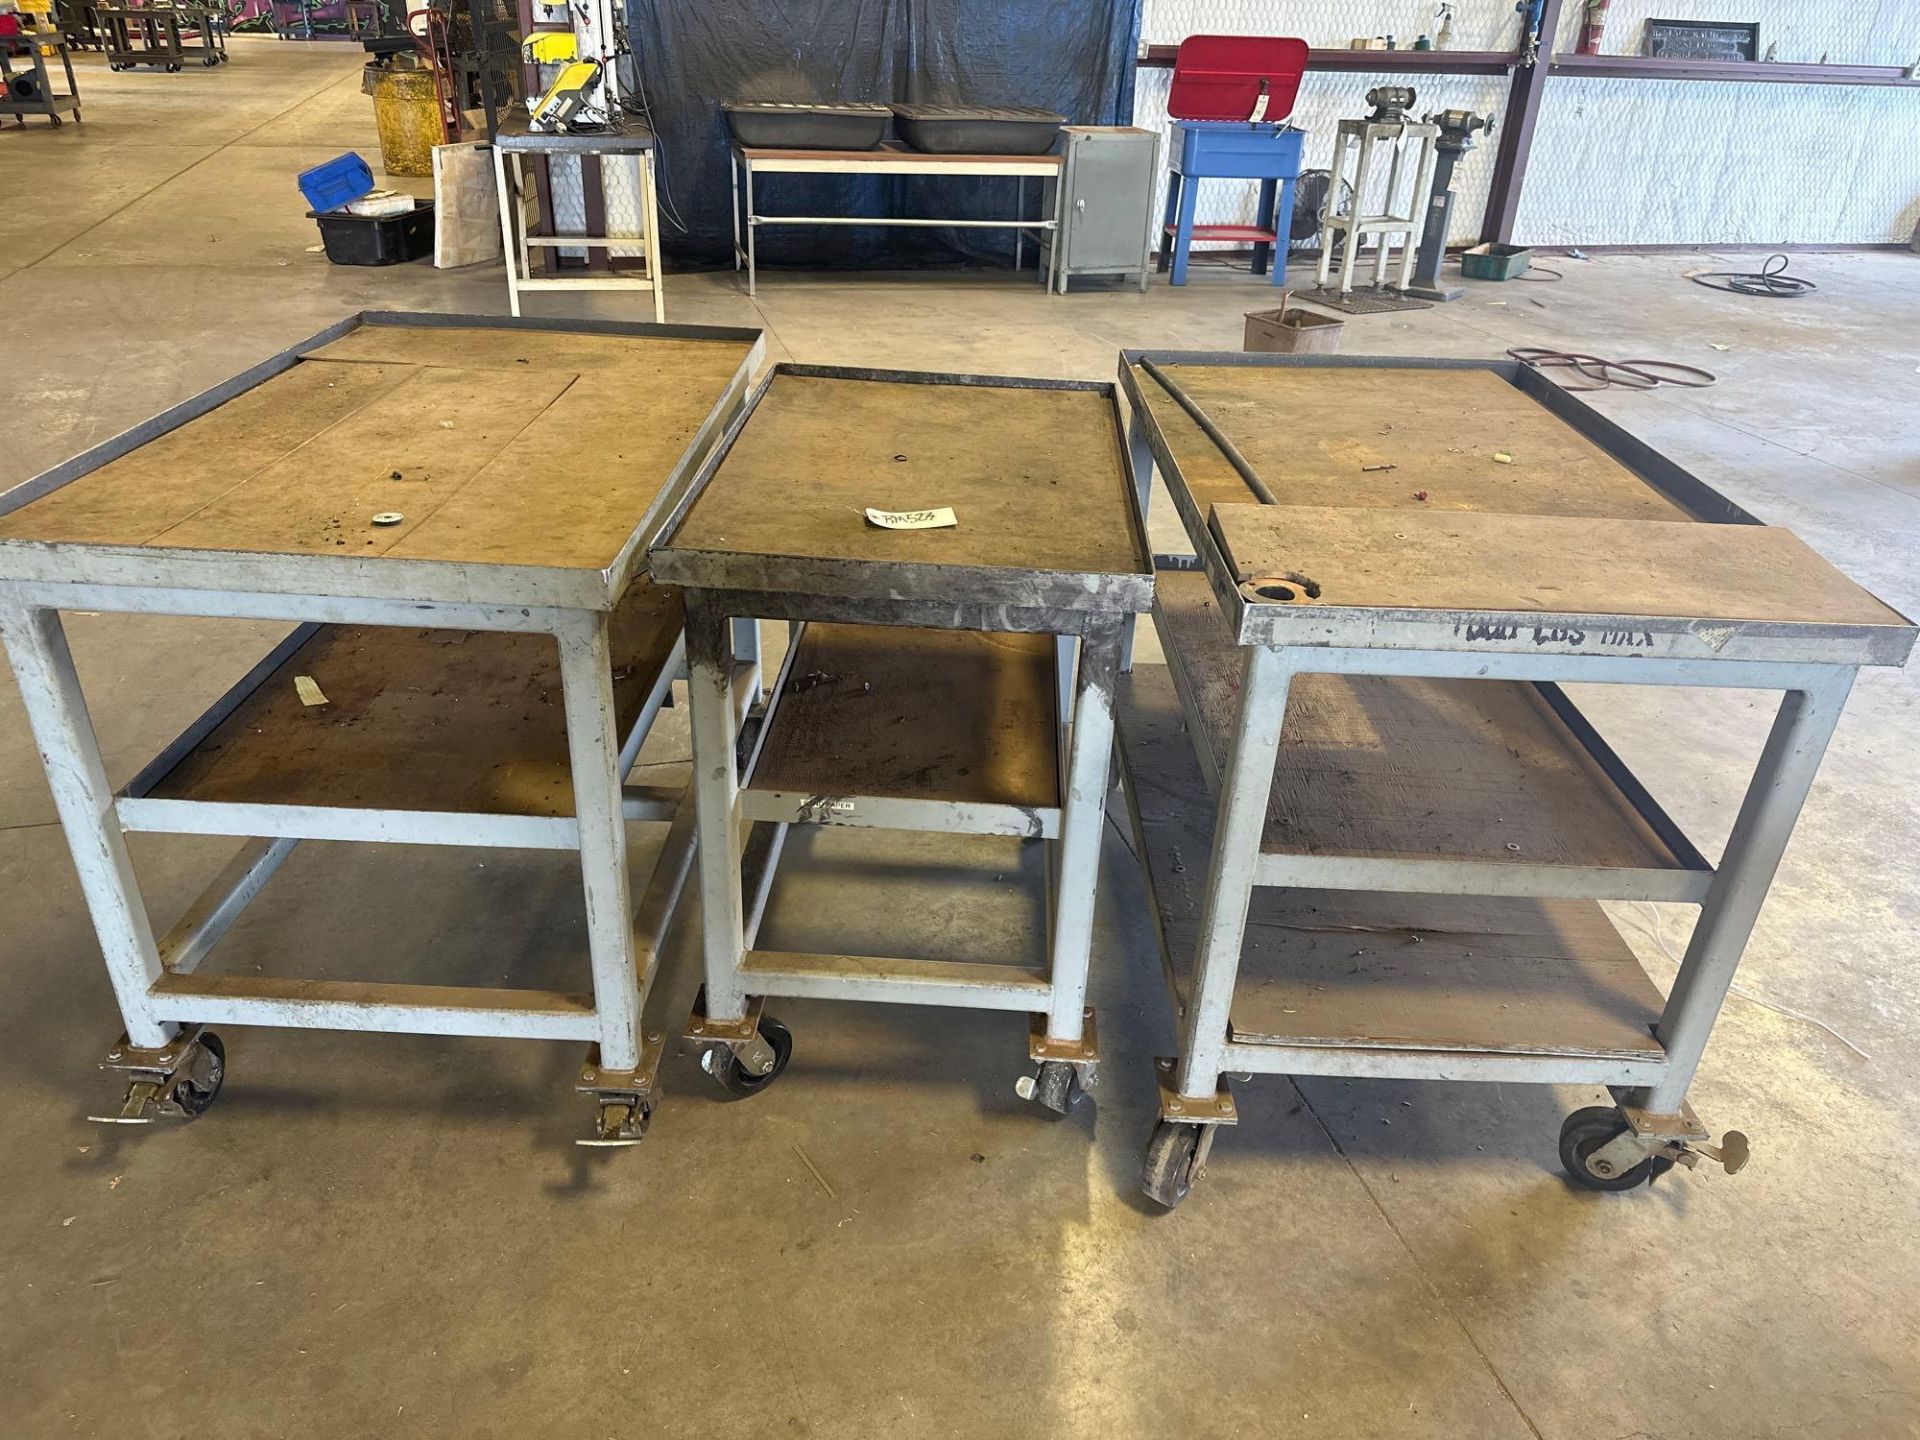 (3) VARIOUS SIZED METAL ROLLING CARTS